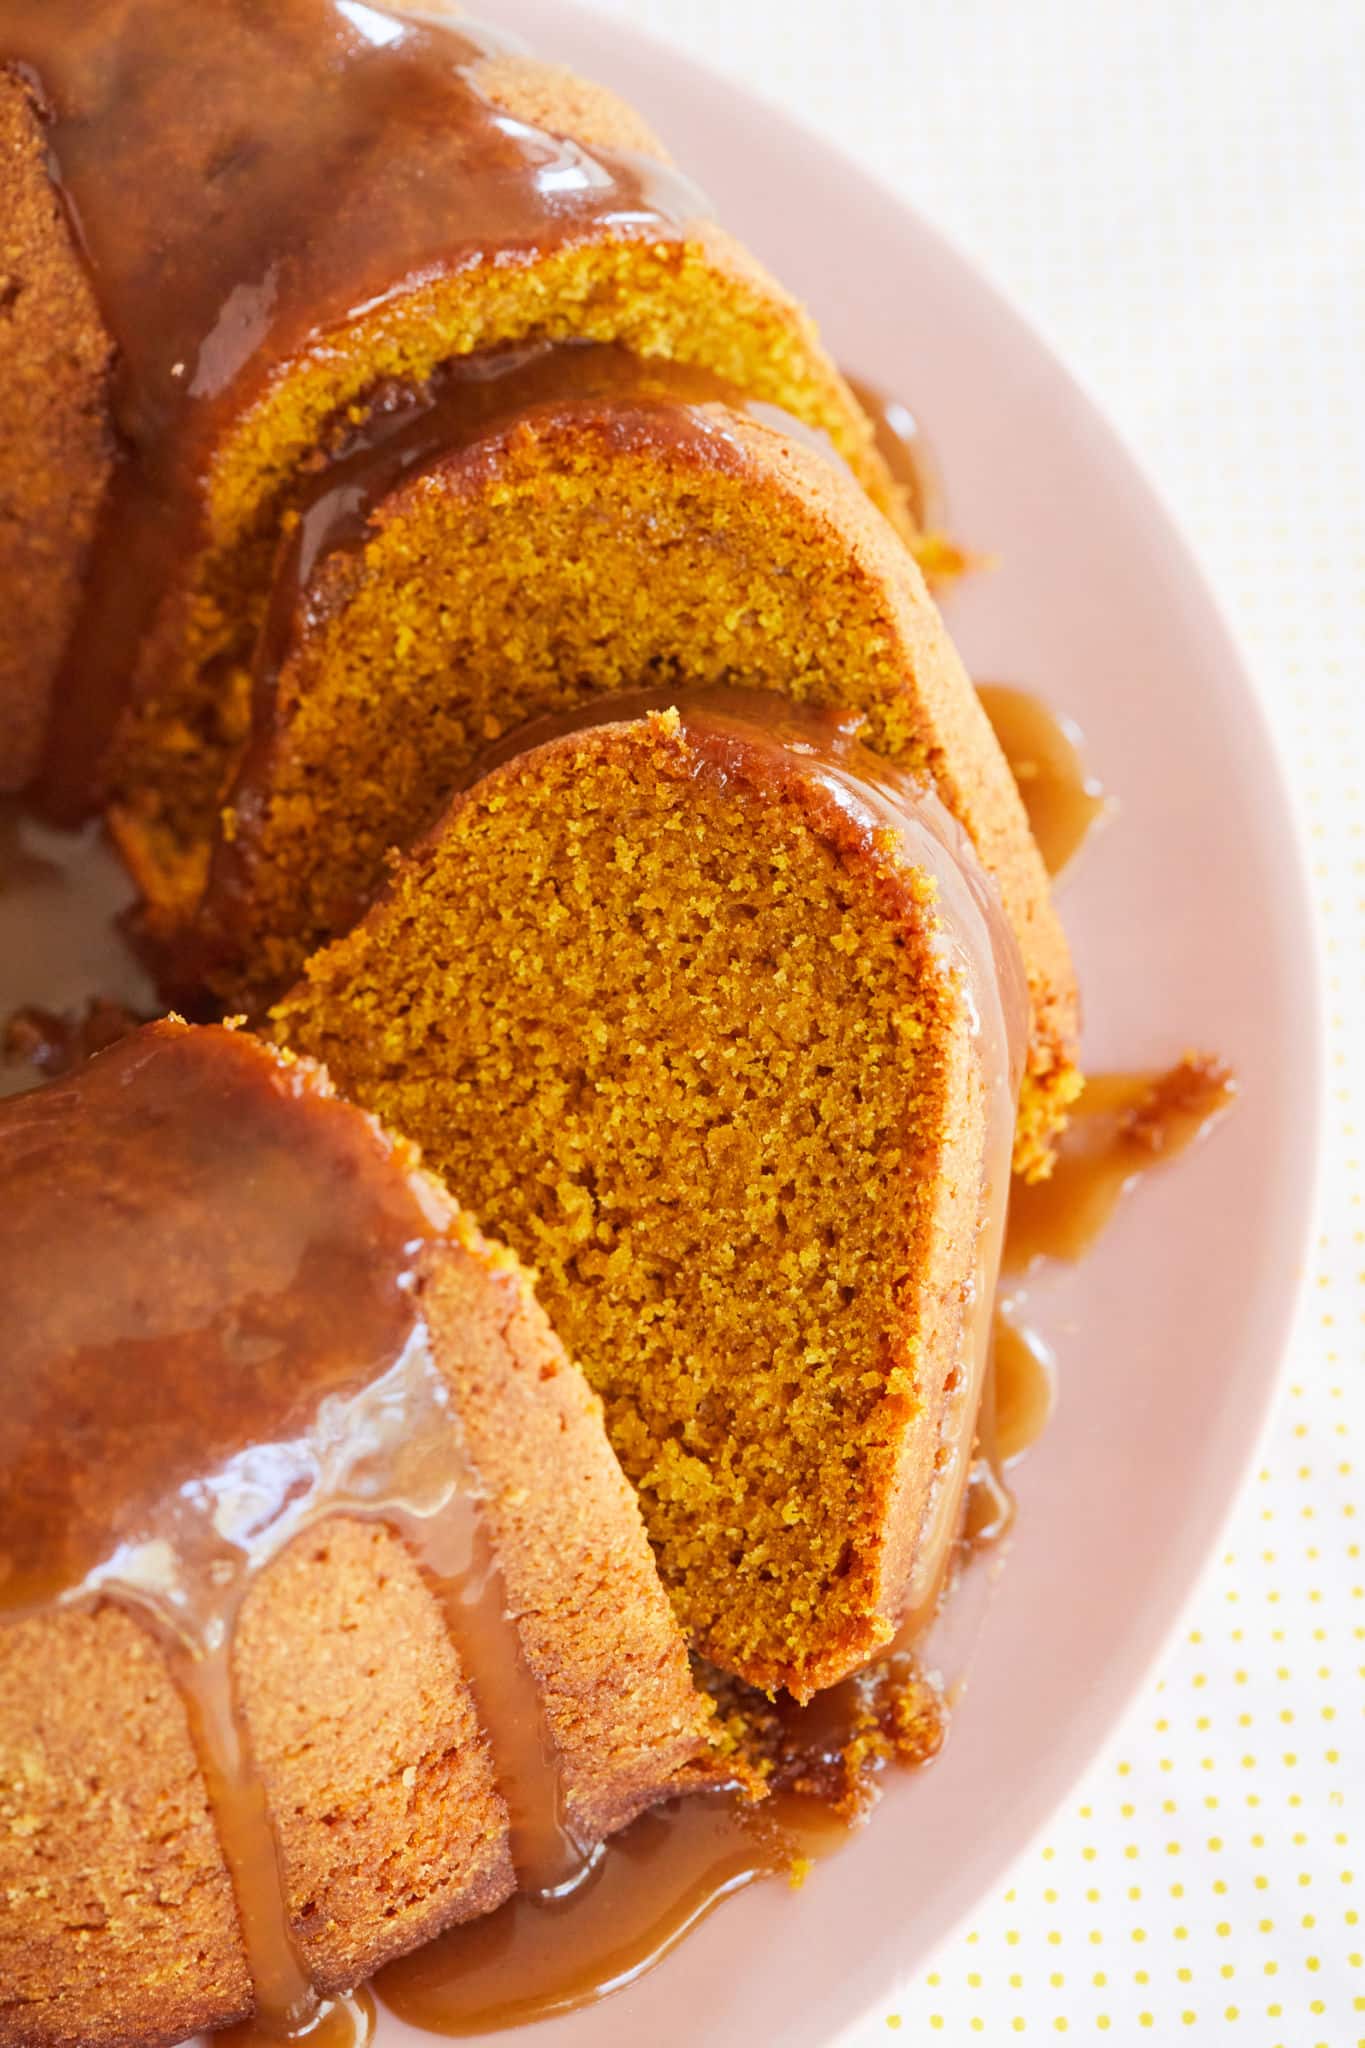 The interior of my pumpkin bundt cake, showing texture in the slices.